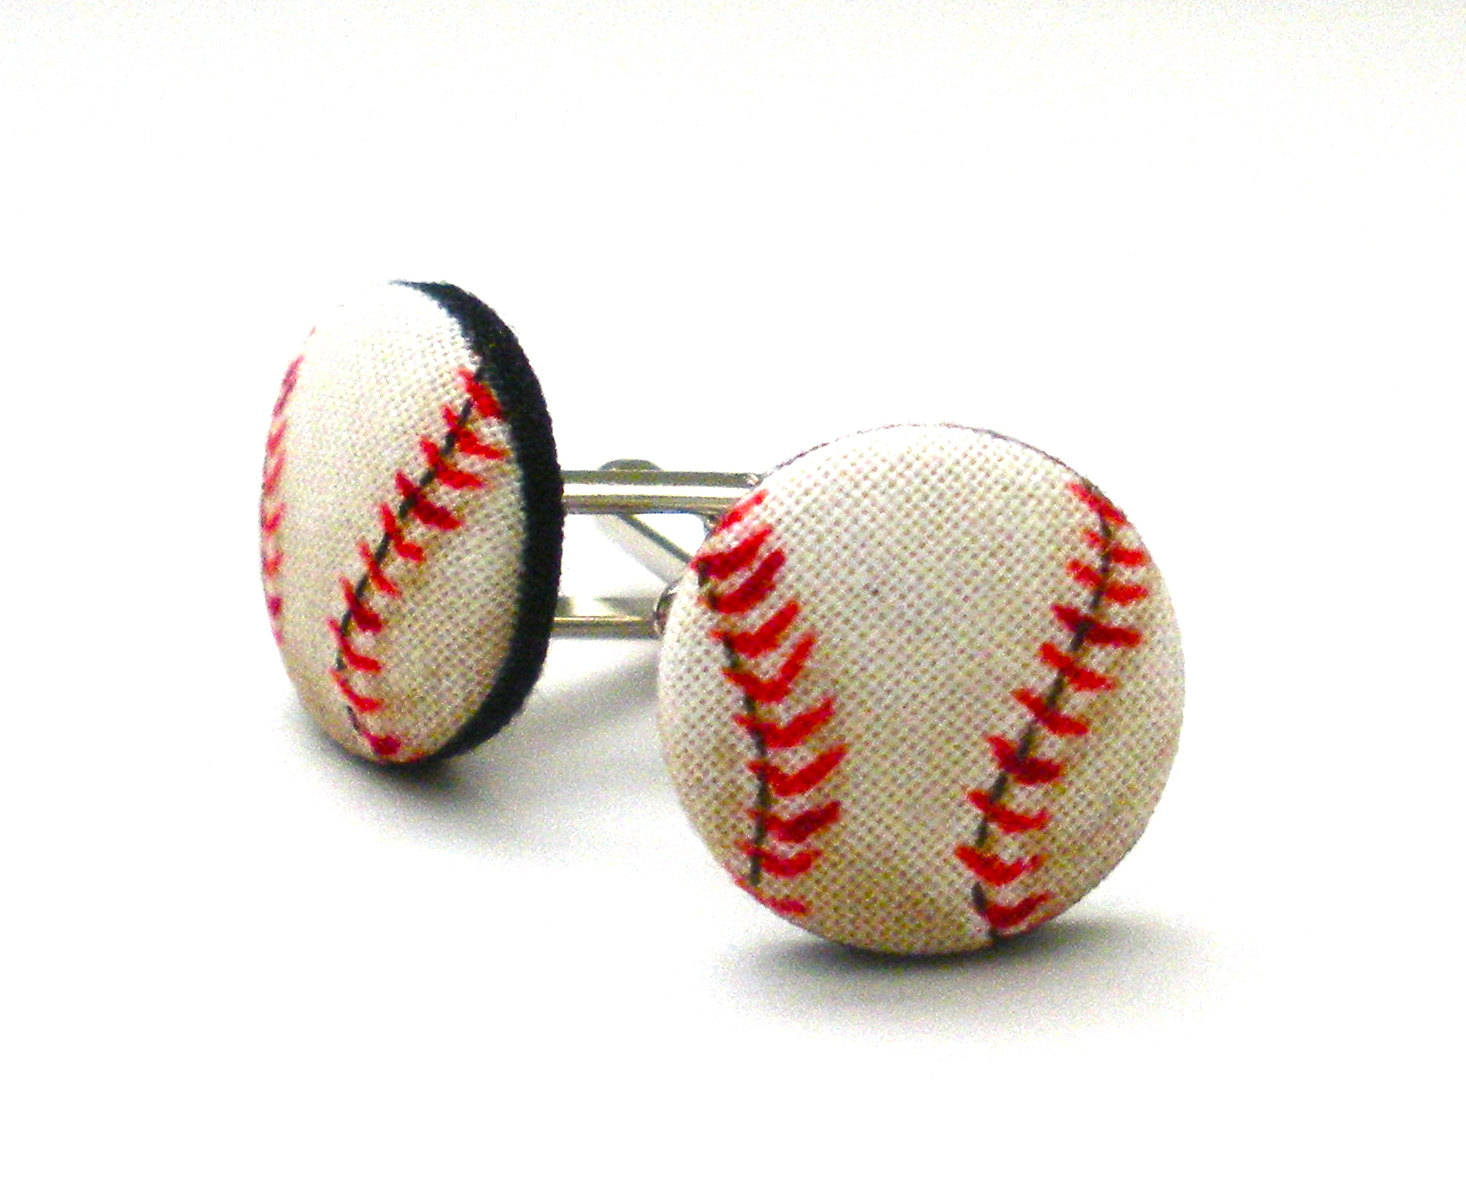 baseball cuff links from the heart by amber